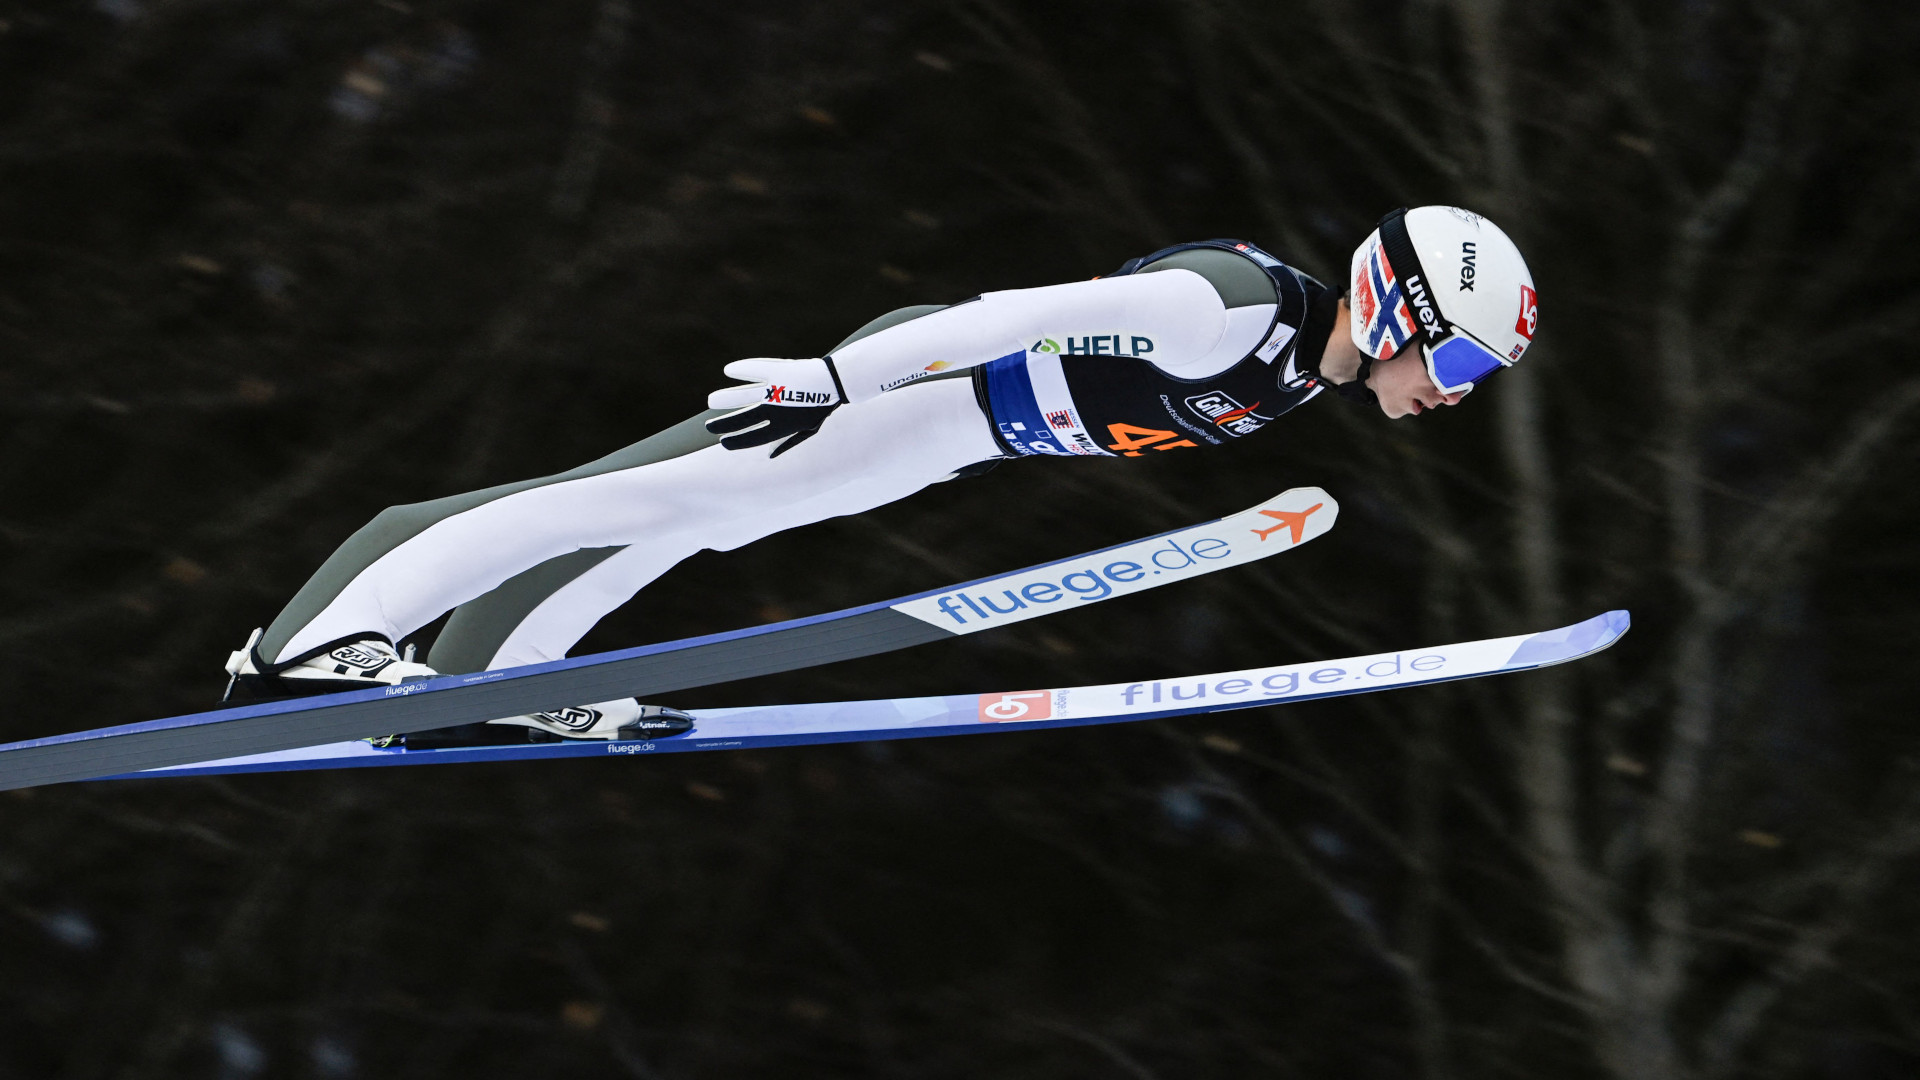 Norway's Halvor Egner Granerud soars through the air during the men's Ski Jumping